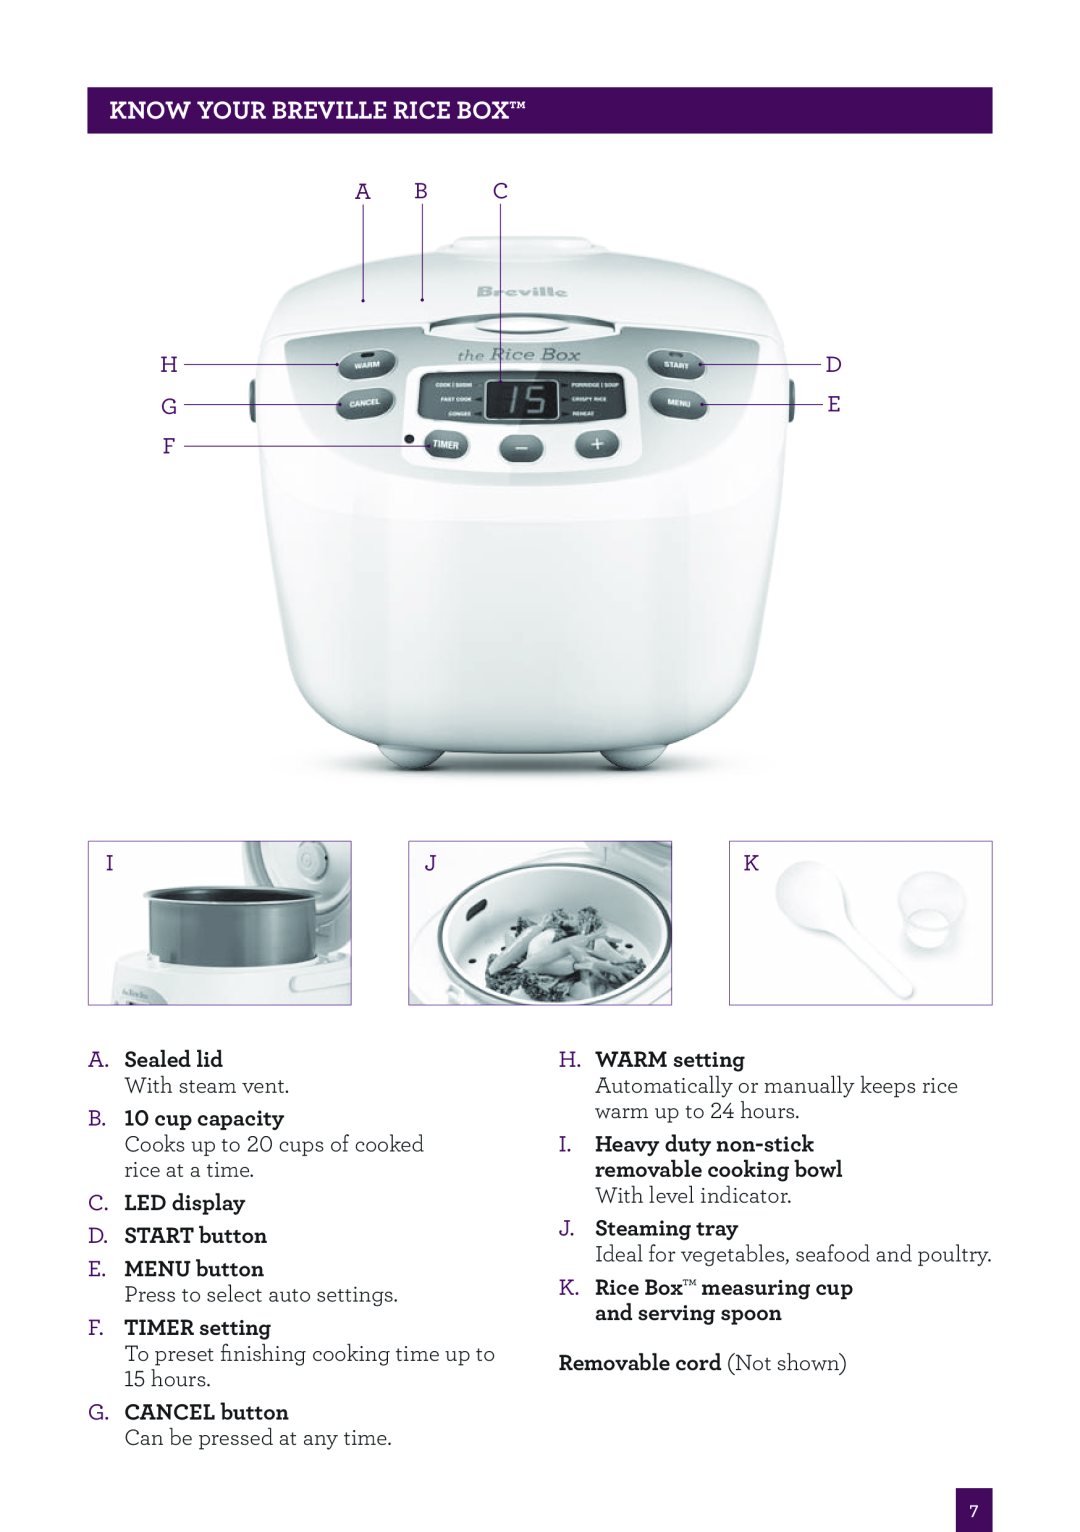 Breville BRC460 brochure KNOW YOUR BREVILLE Rice Box, A B C Hd Ge F 